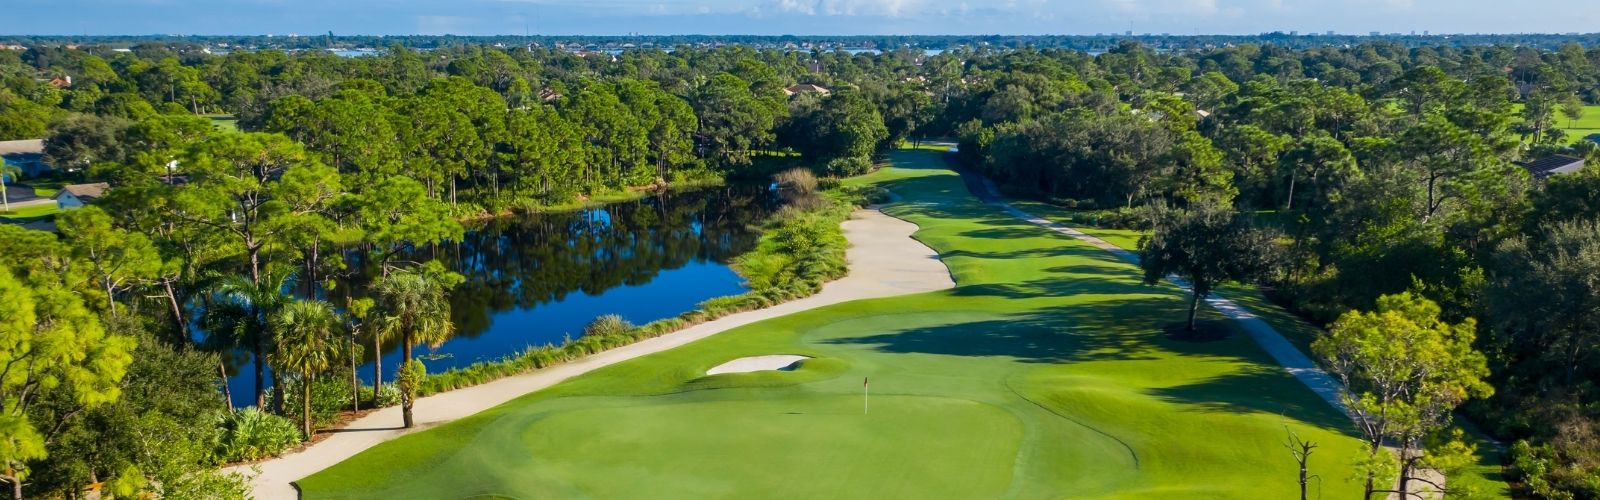 Harbour Ridge Yacht & Country Club Receives Celebration Course of The Year